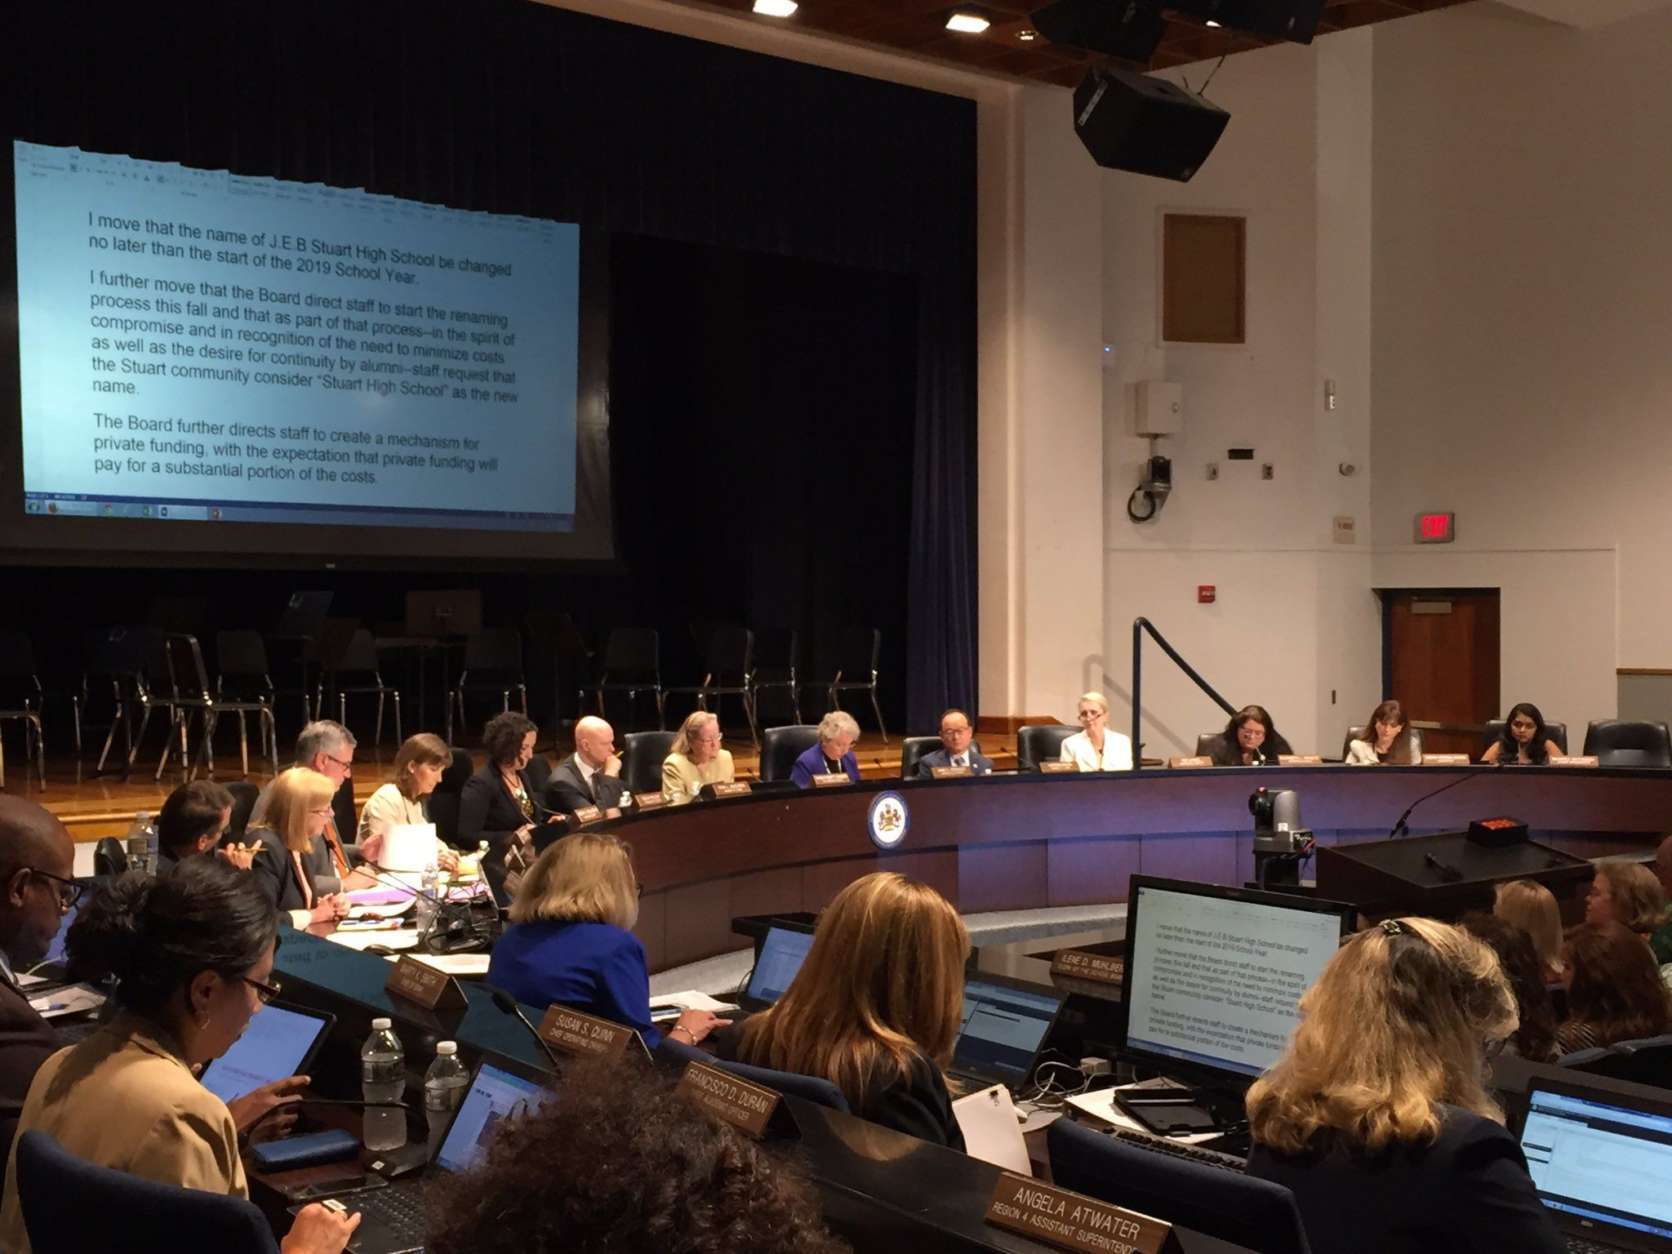 The Fairfax County School Board discussed the motion to change the name of J.E.B. Stuart High School. (WTOP/Michelle Basch)